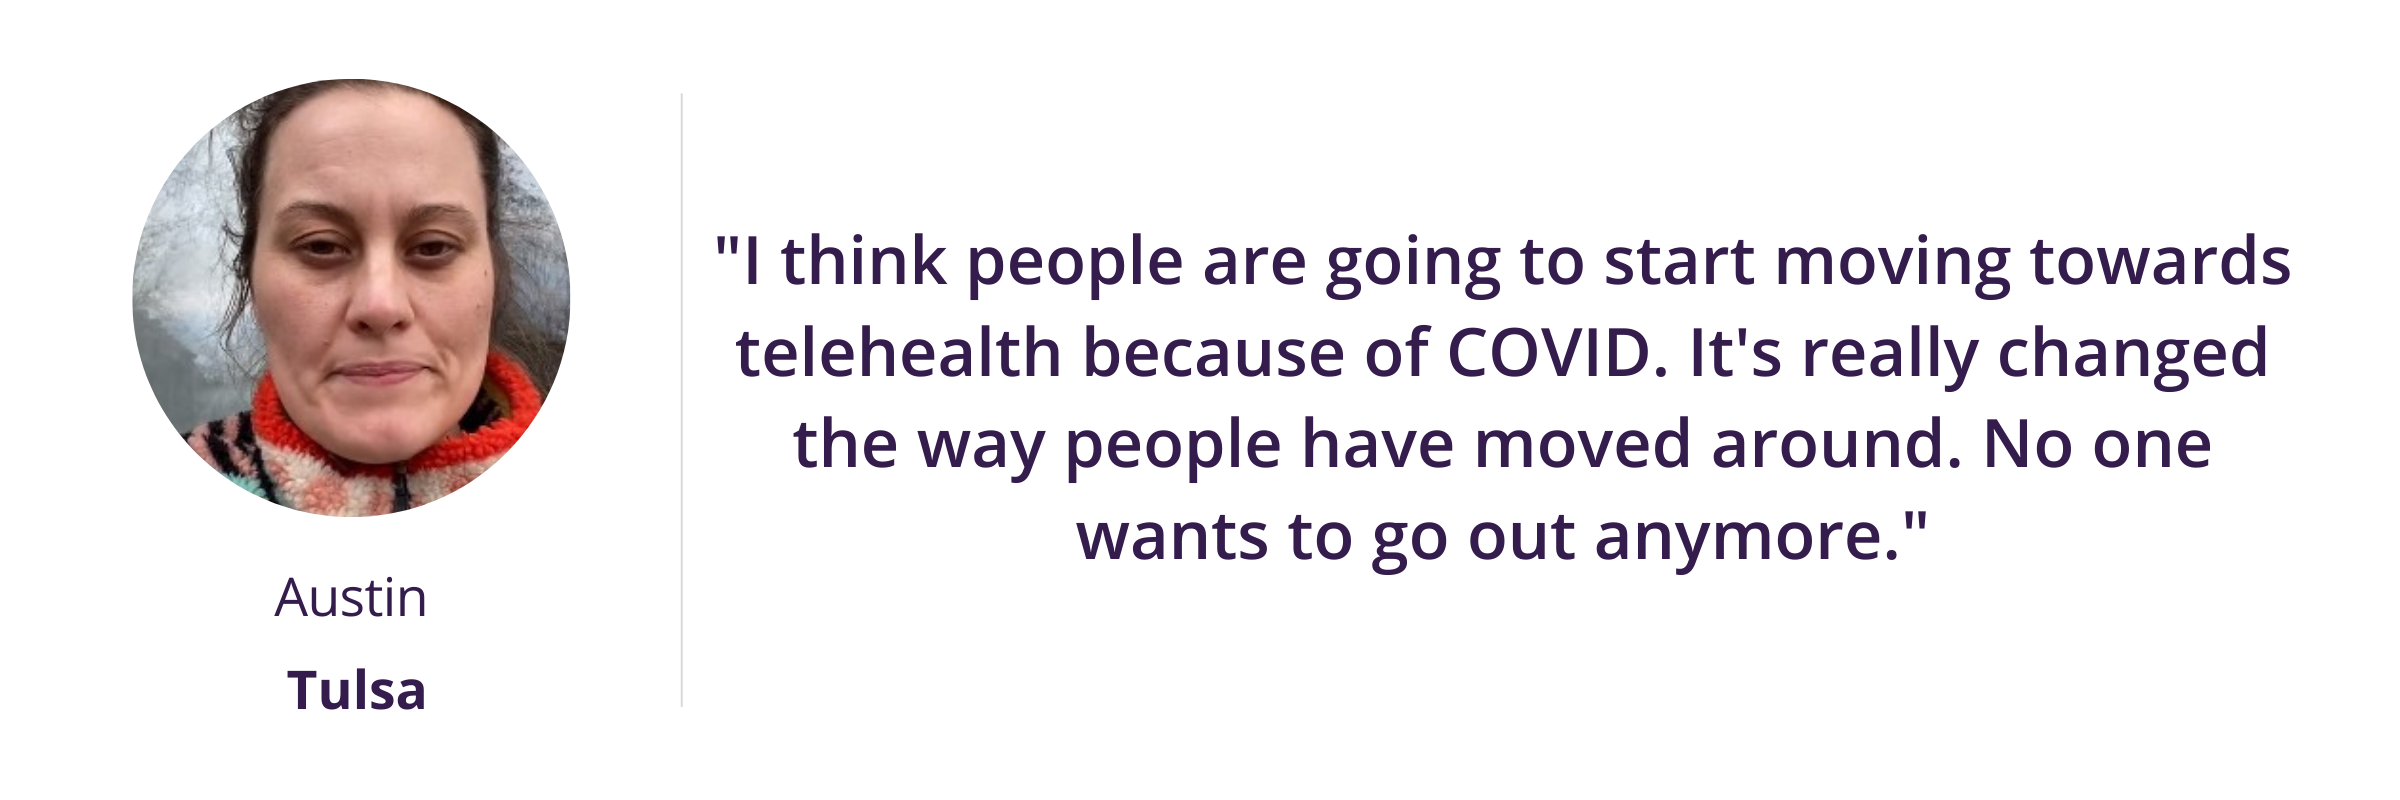 I think people are going to start moving towards telehealth because of COVID, It's really changed the way people have moved around. No one wants to go out anymore.